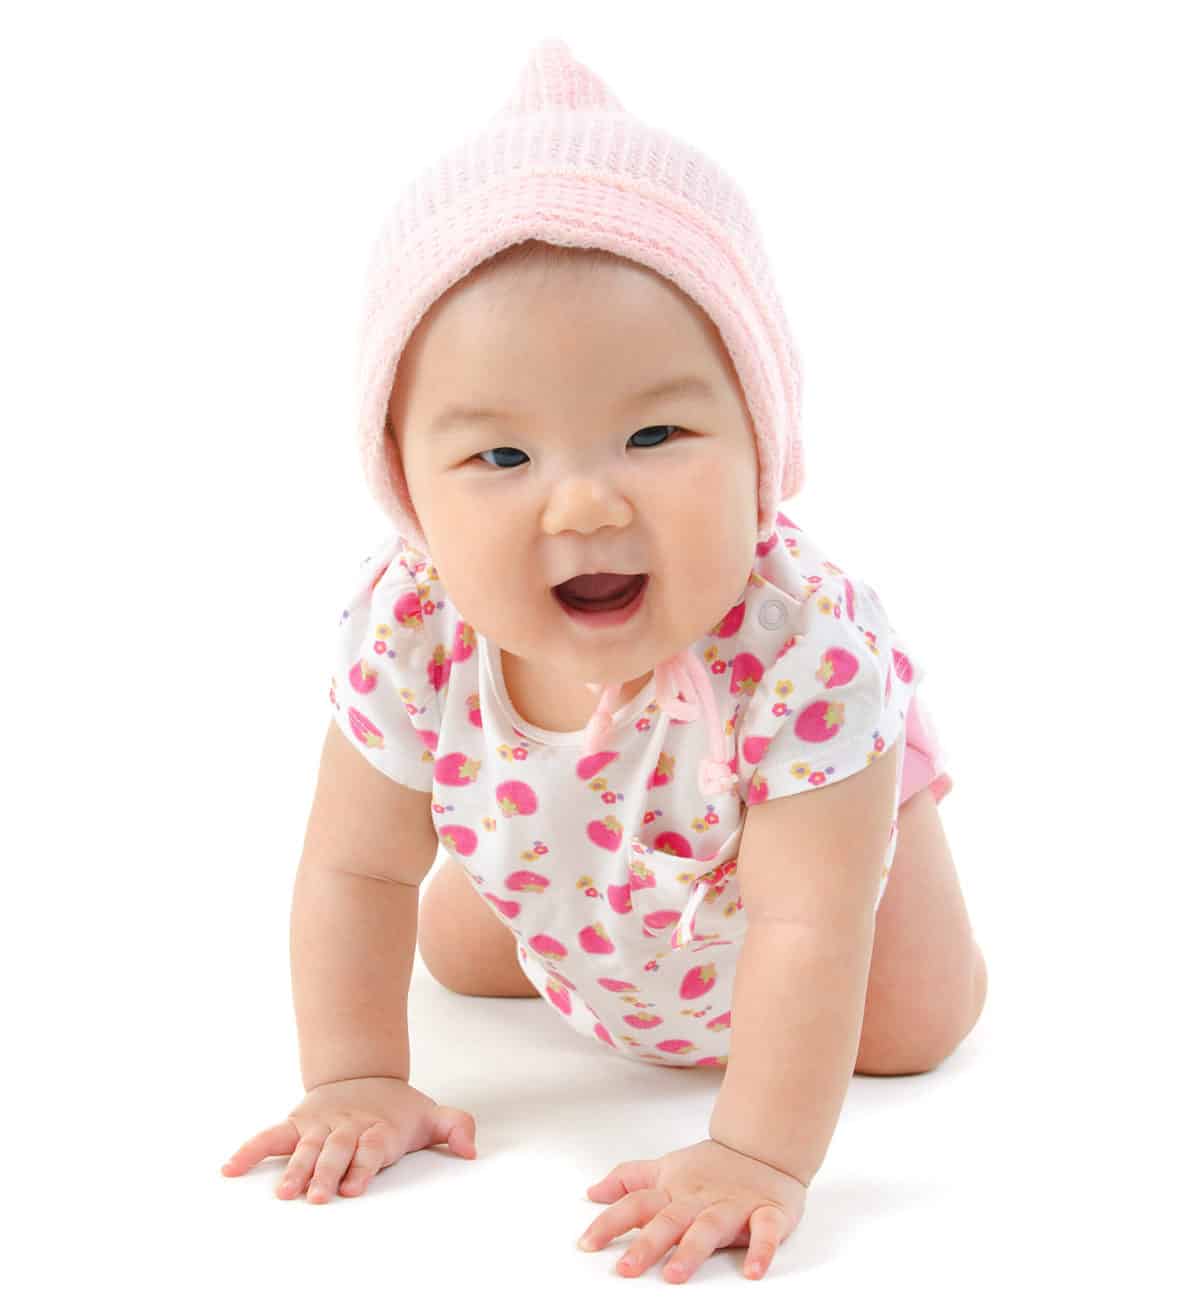 Six months old baby girl crawling over white background The boy is Asian appearing. She is wearing a light pink knitted cap ad a white  short-sleeved onesie / romper with apink strawberry pattern.. Her mouth is open. She seems happy. 